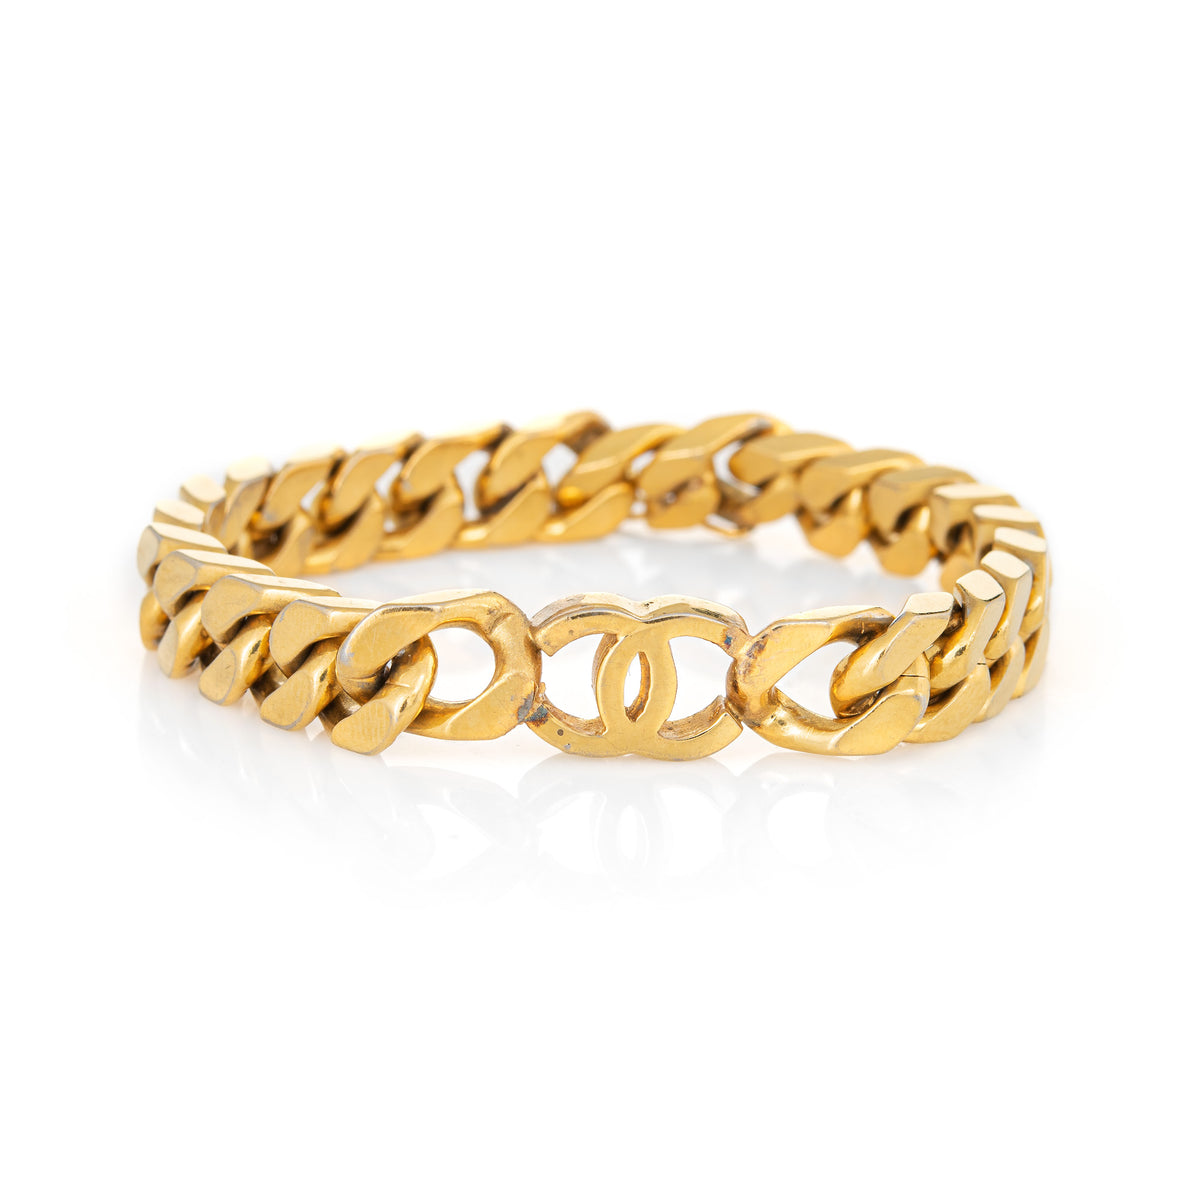 aprococo - CHANEL HAND MADE 80's Quilted GOLD CHANEL Cuff Bracelet